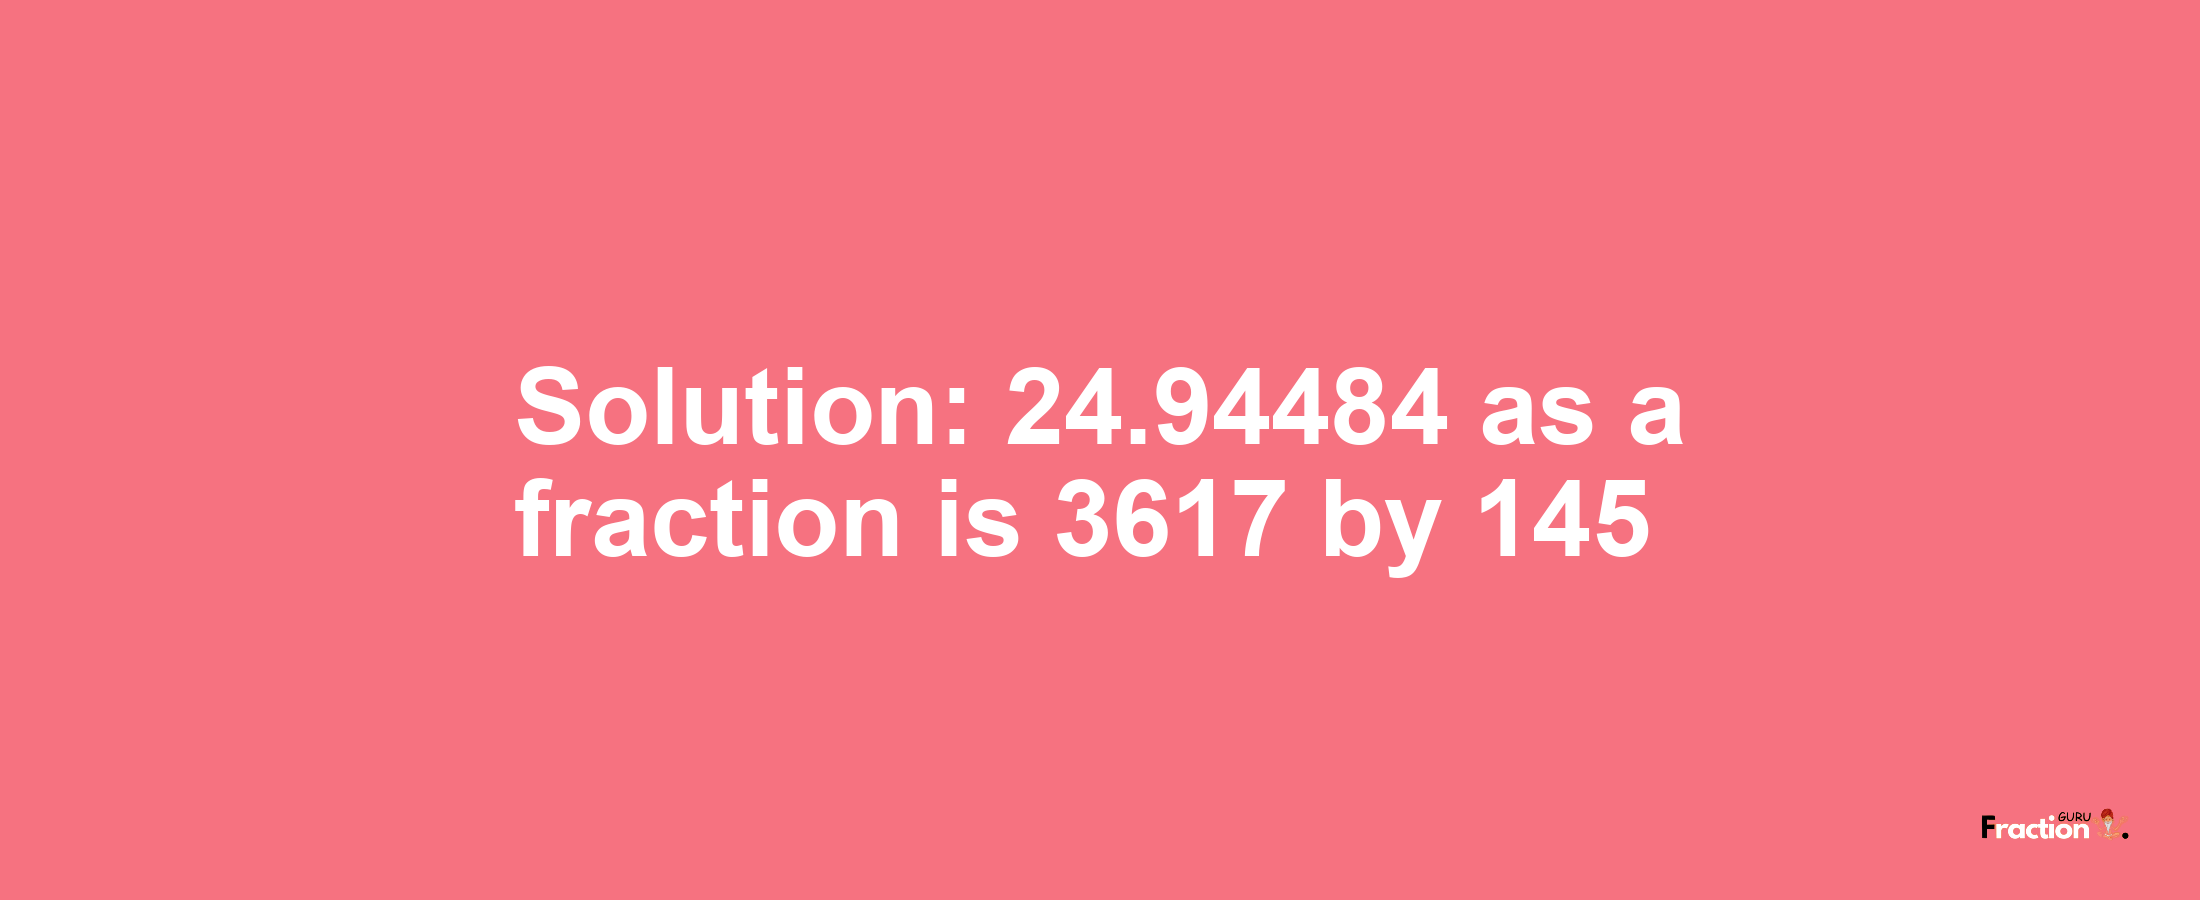 Solution:24.94484 as a fraction is 3617/145